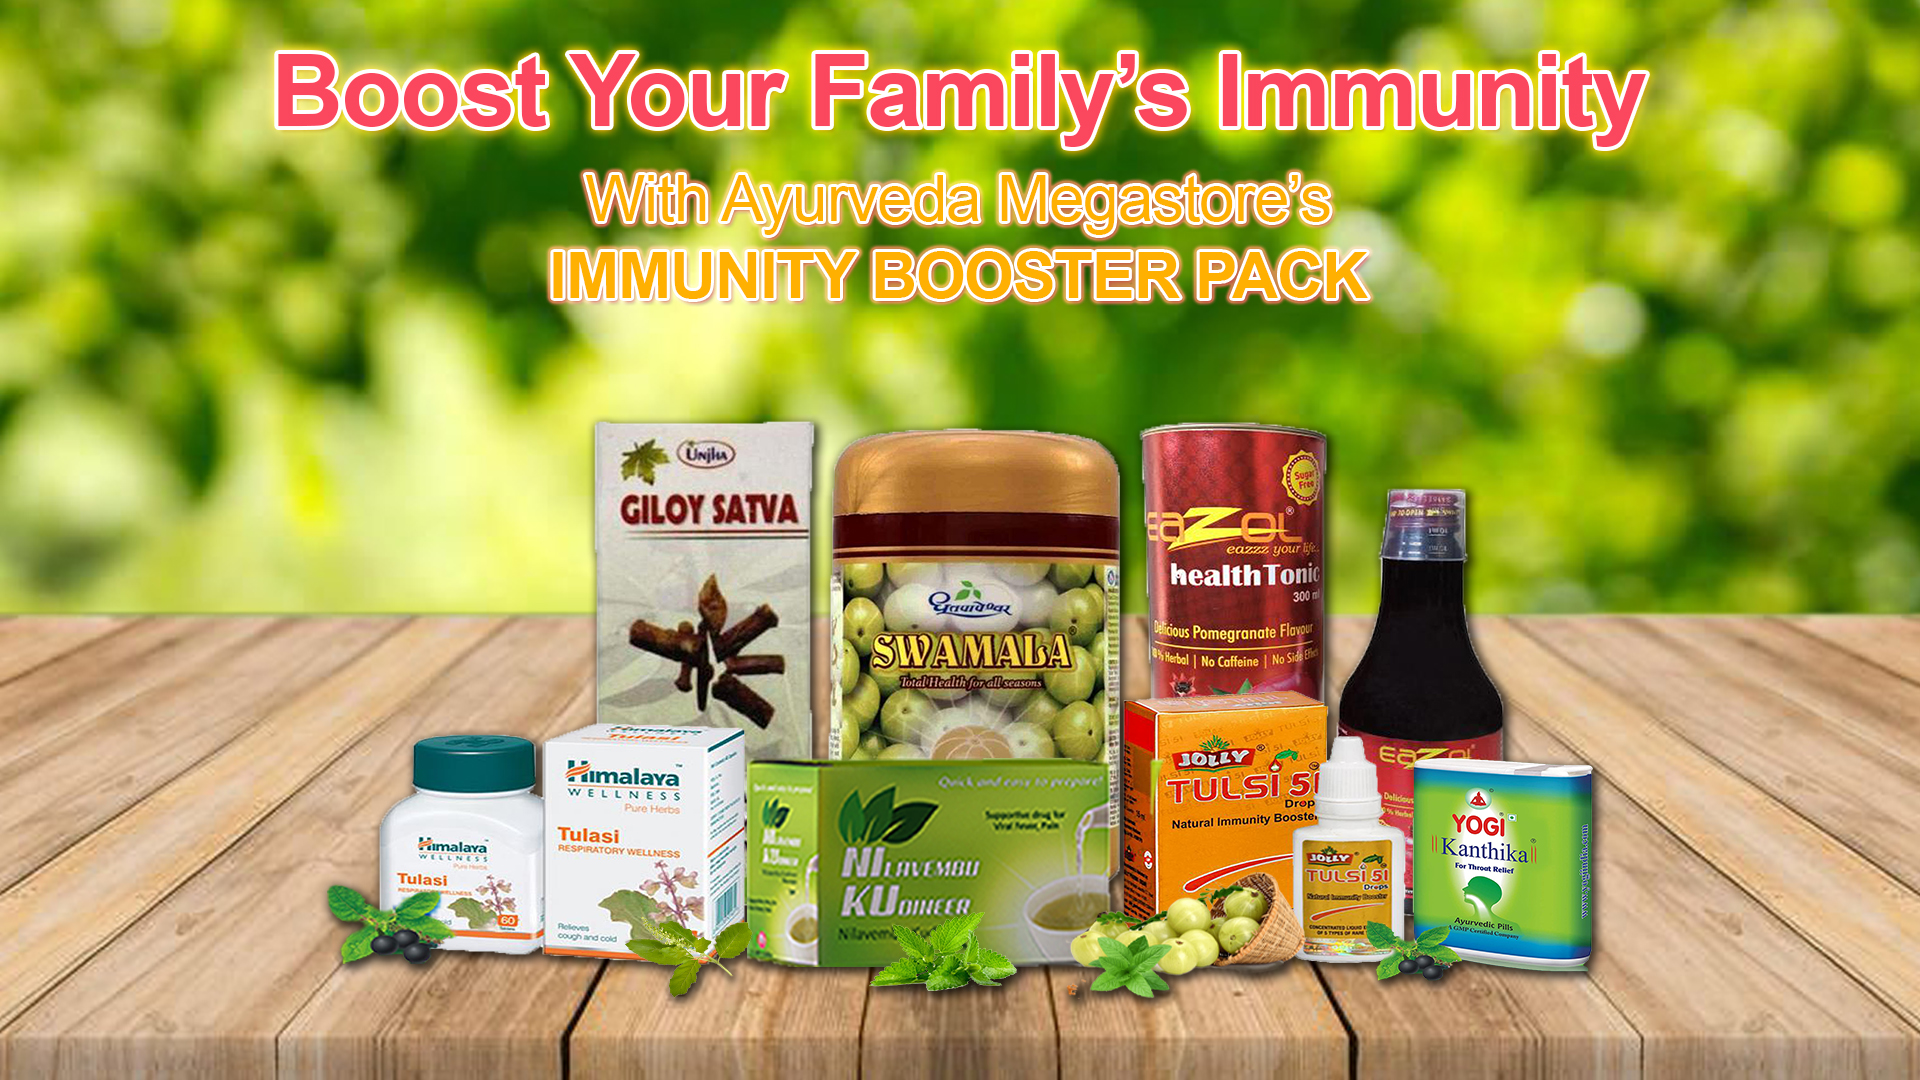 How To Boost The Immune System With Ayurvedic Medicines?